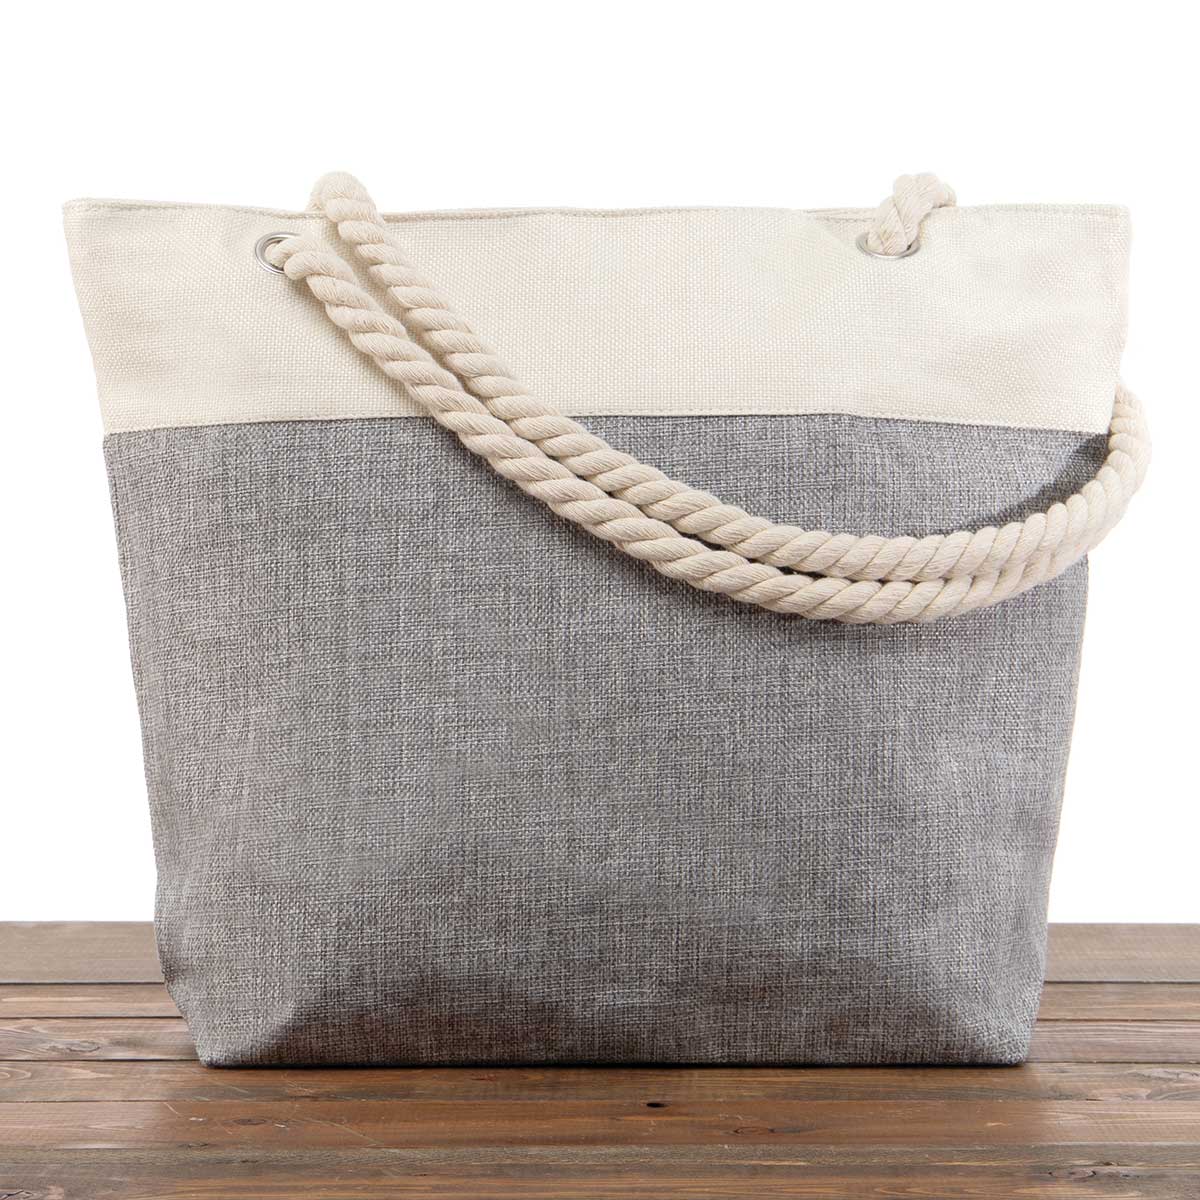 Grey Canvas Summer Bag 17.5"x5"x14" with 10" Rope Shoulder Strap